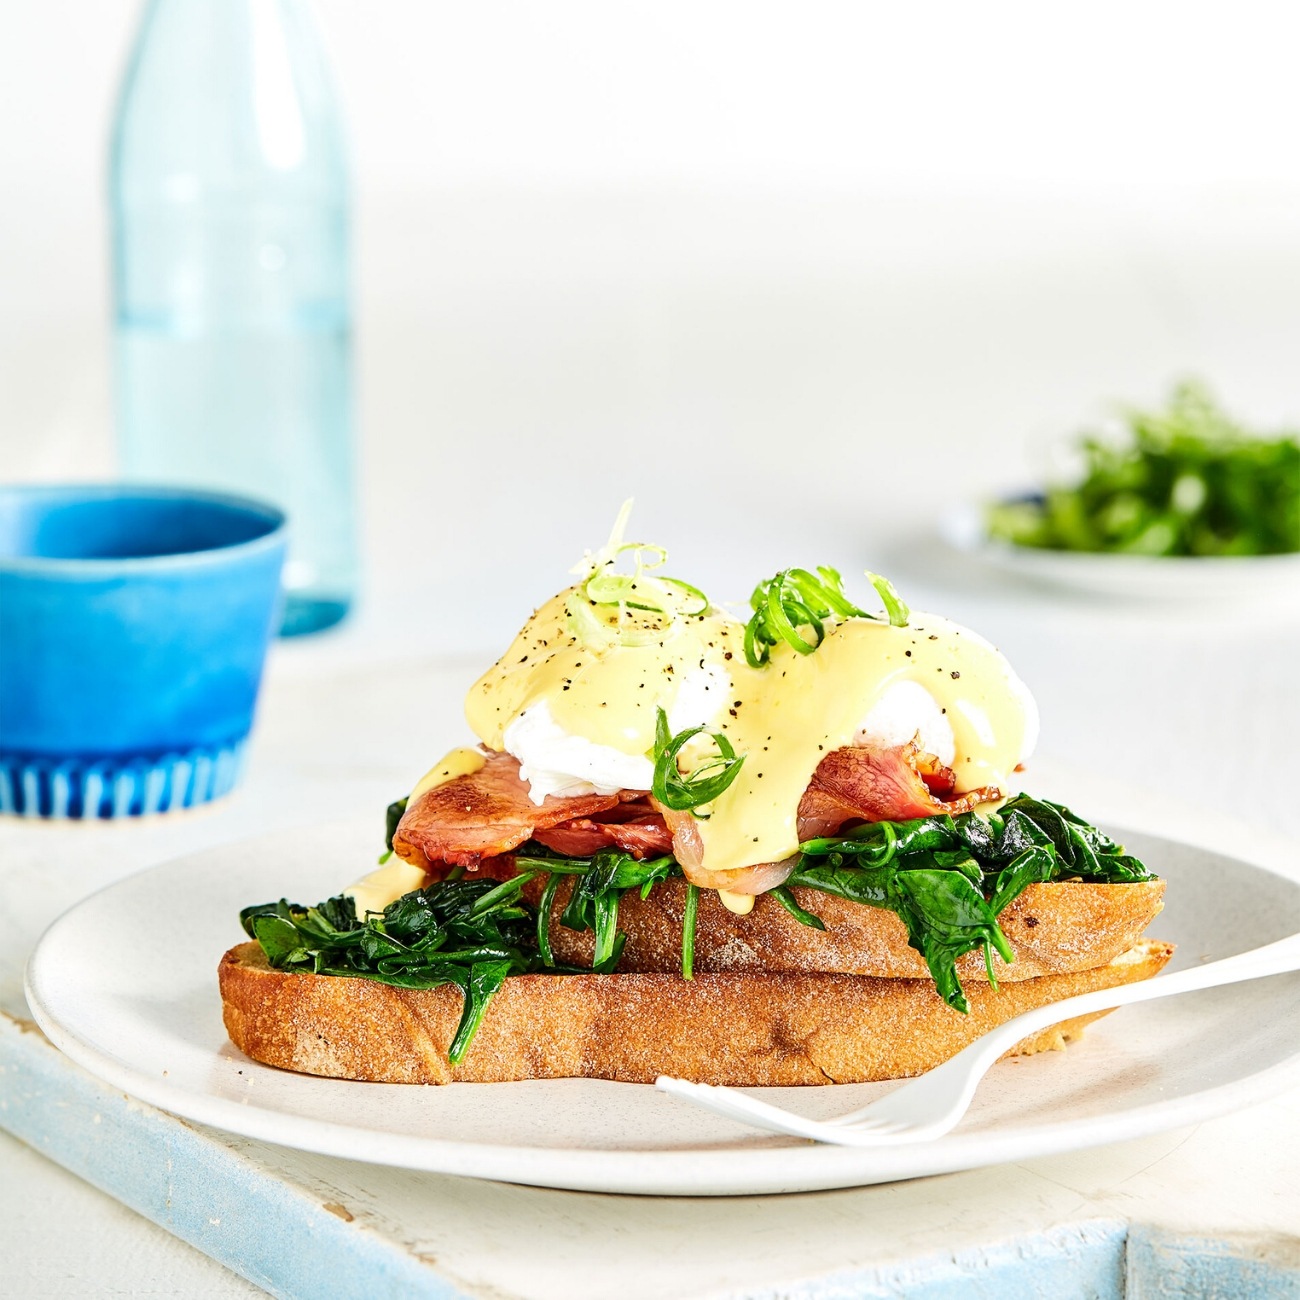 Fancy up your brekky with Eggs Florentine